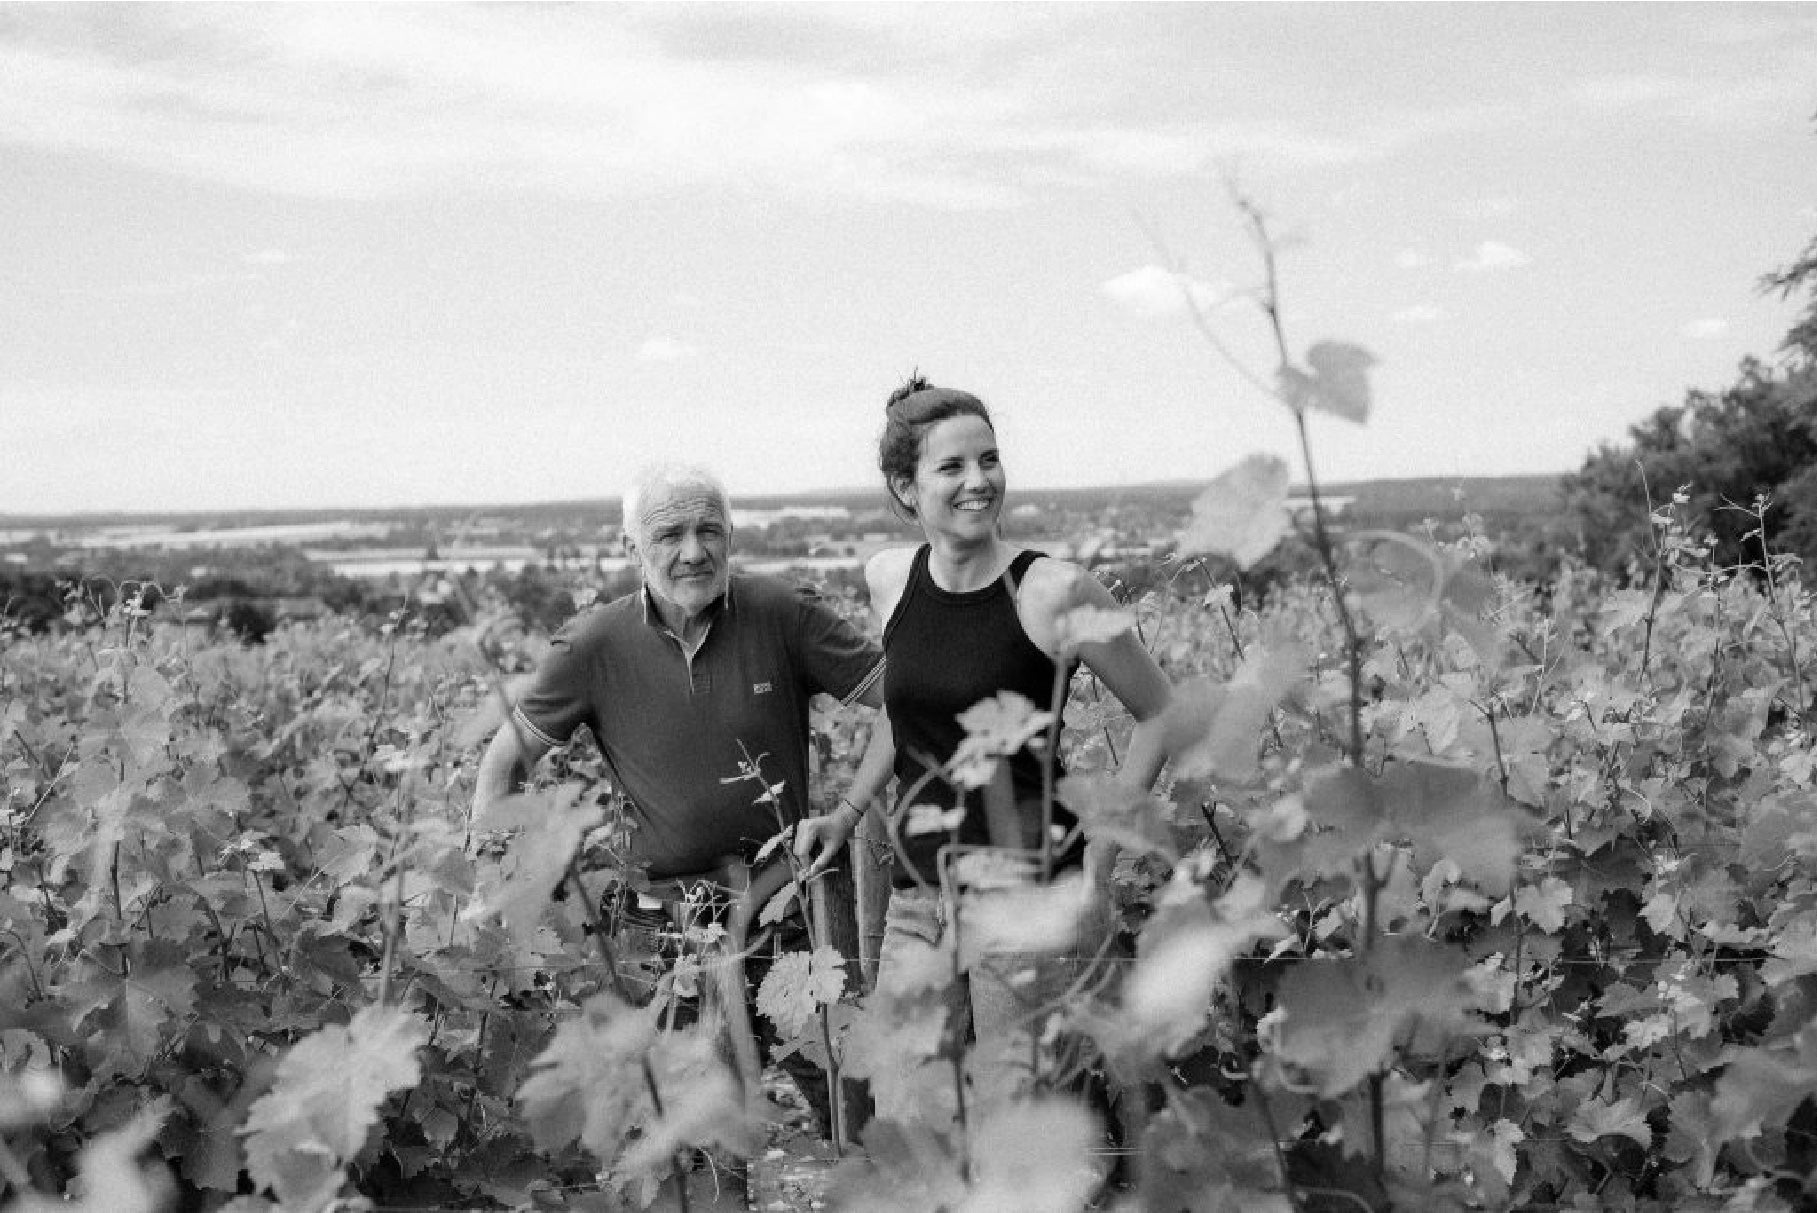 Regis Minet and Lucia Mineur-Billet in the vines